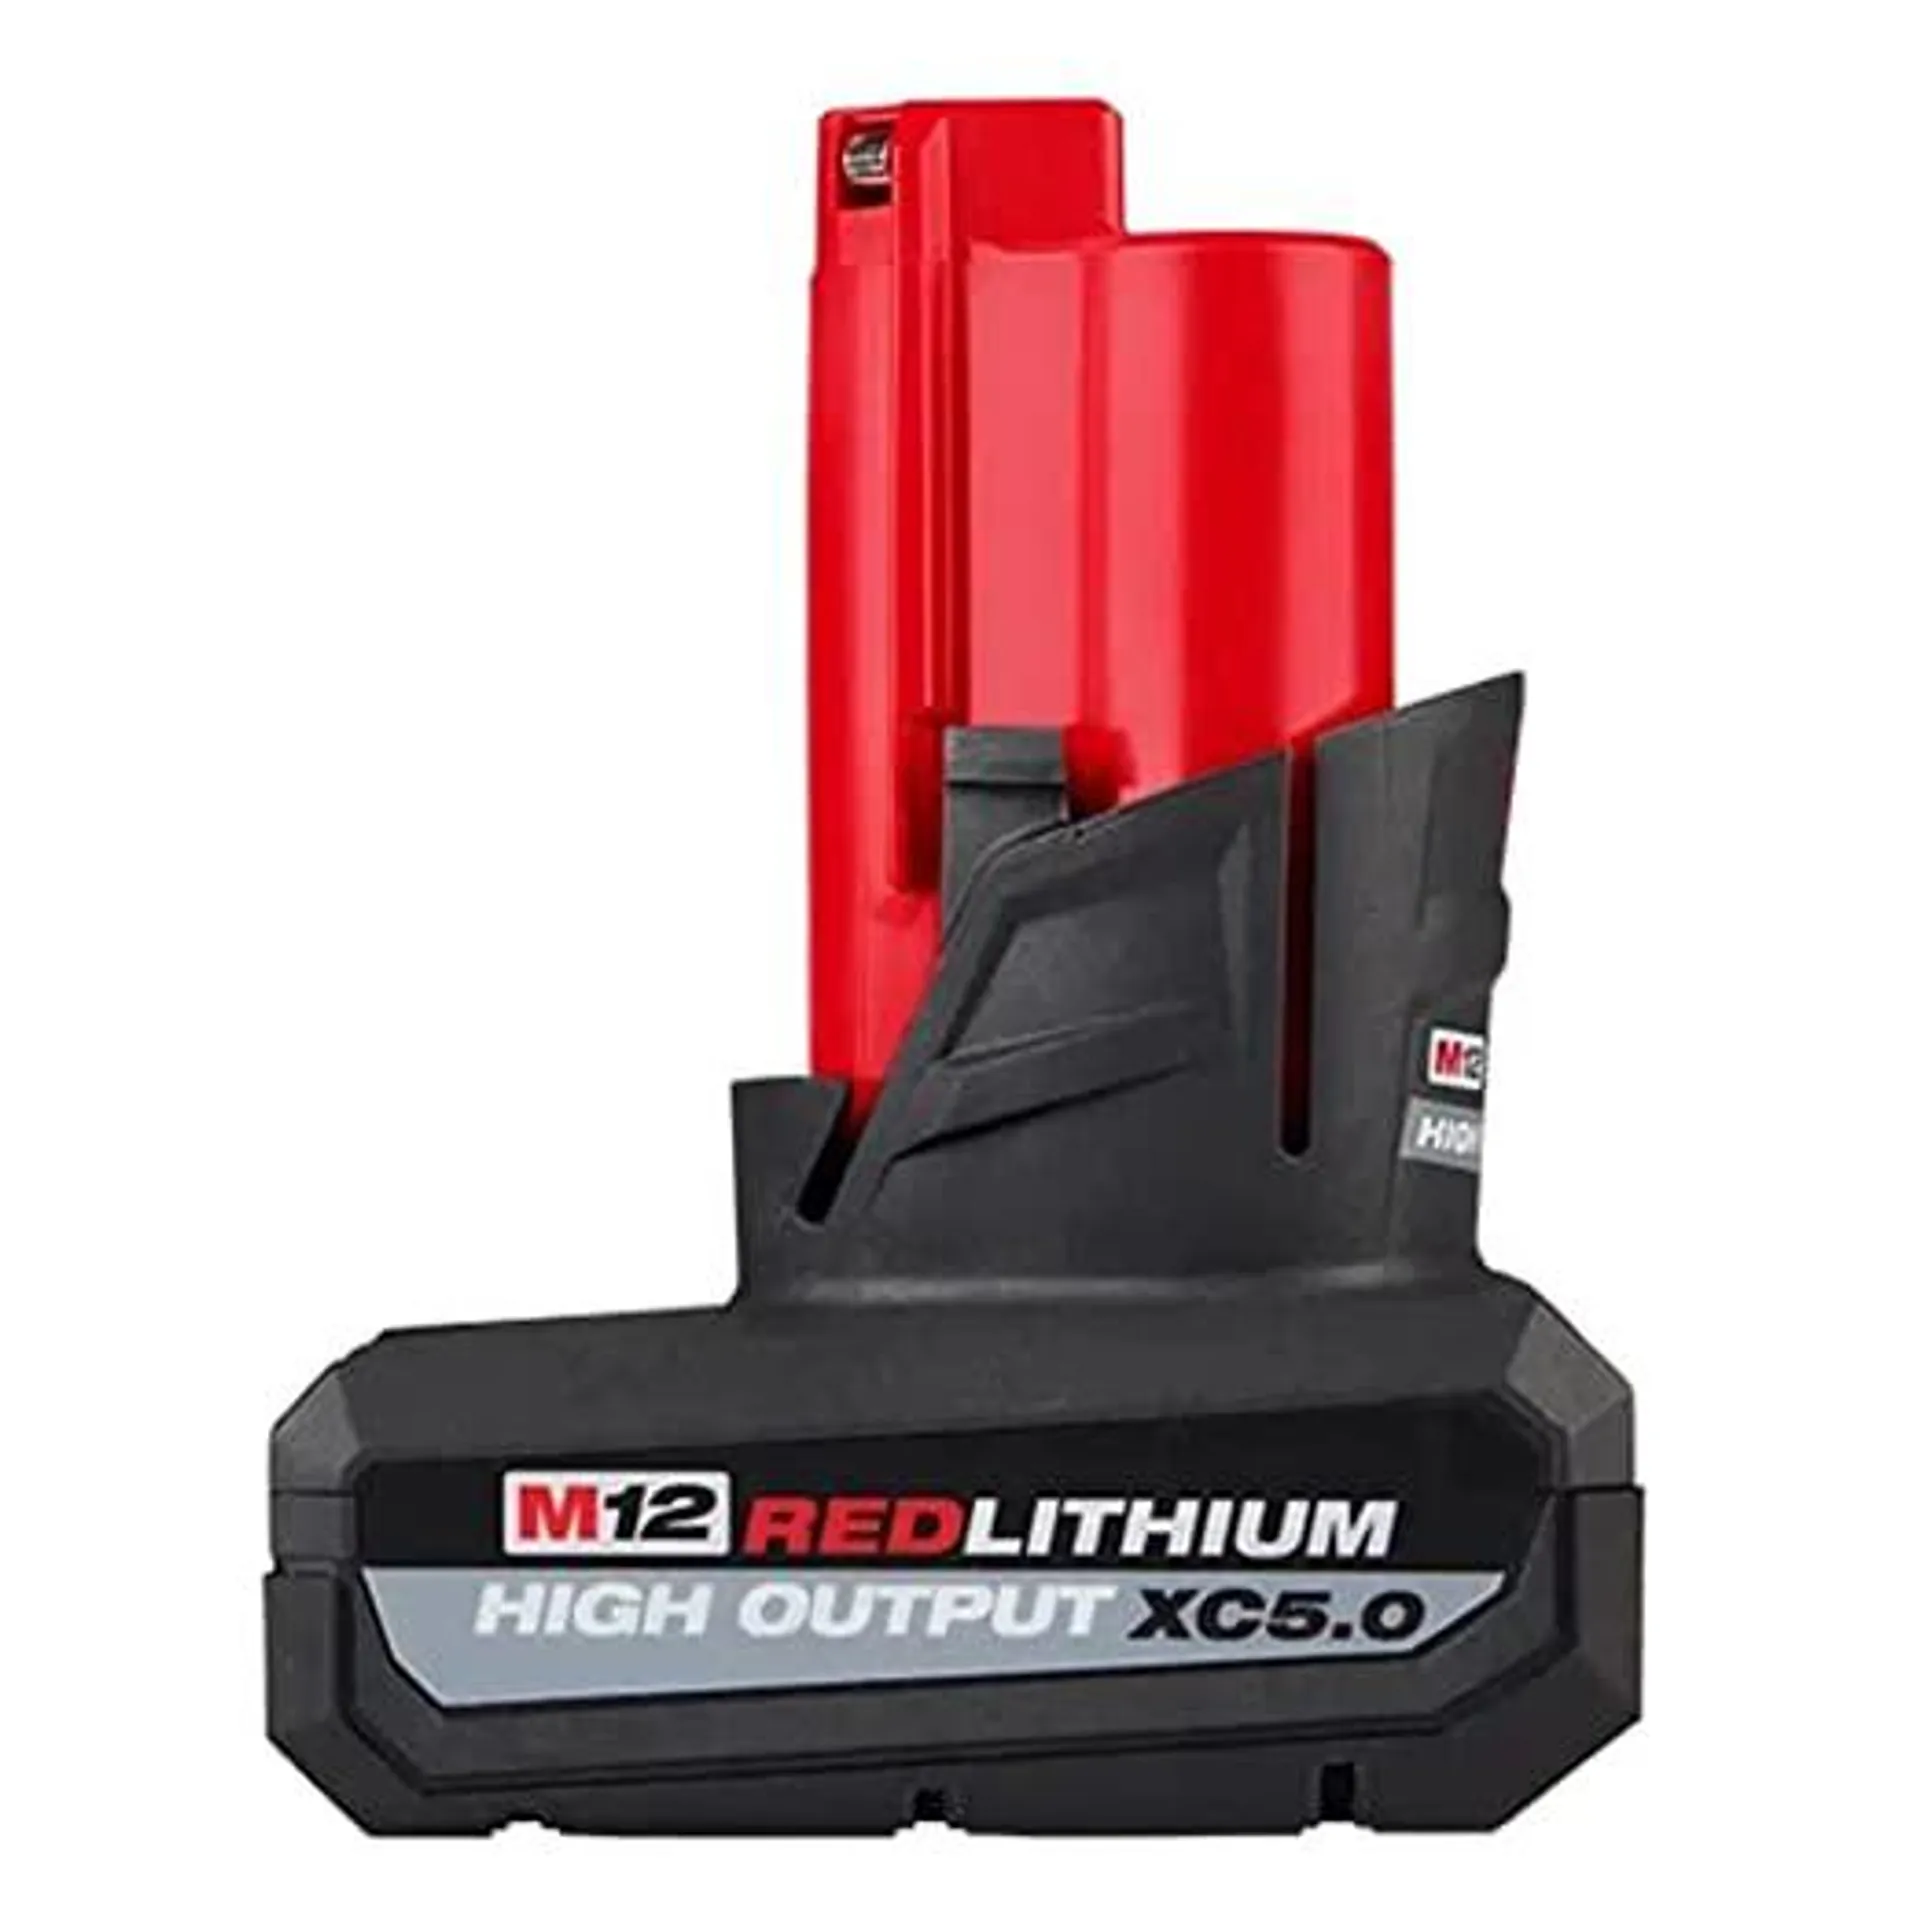 Milwaukee Electric Tool M12 Red Lithium High Output